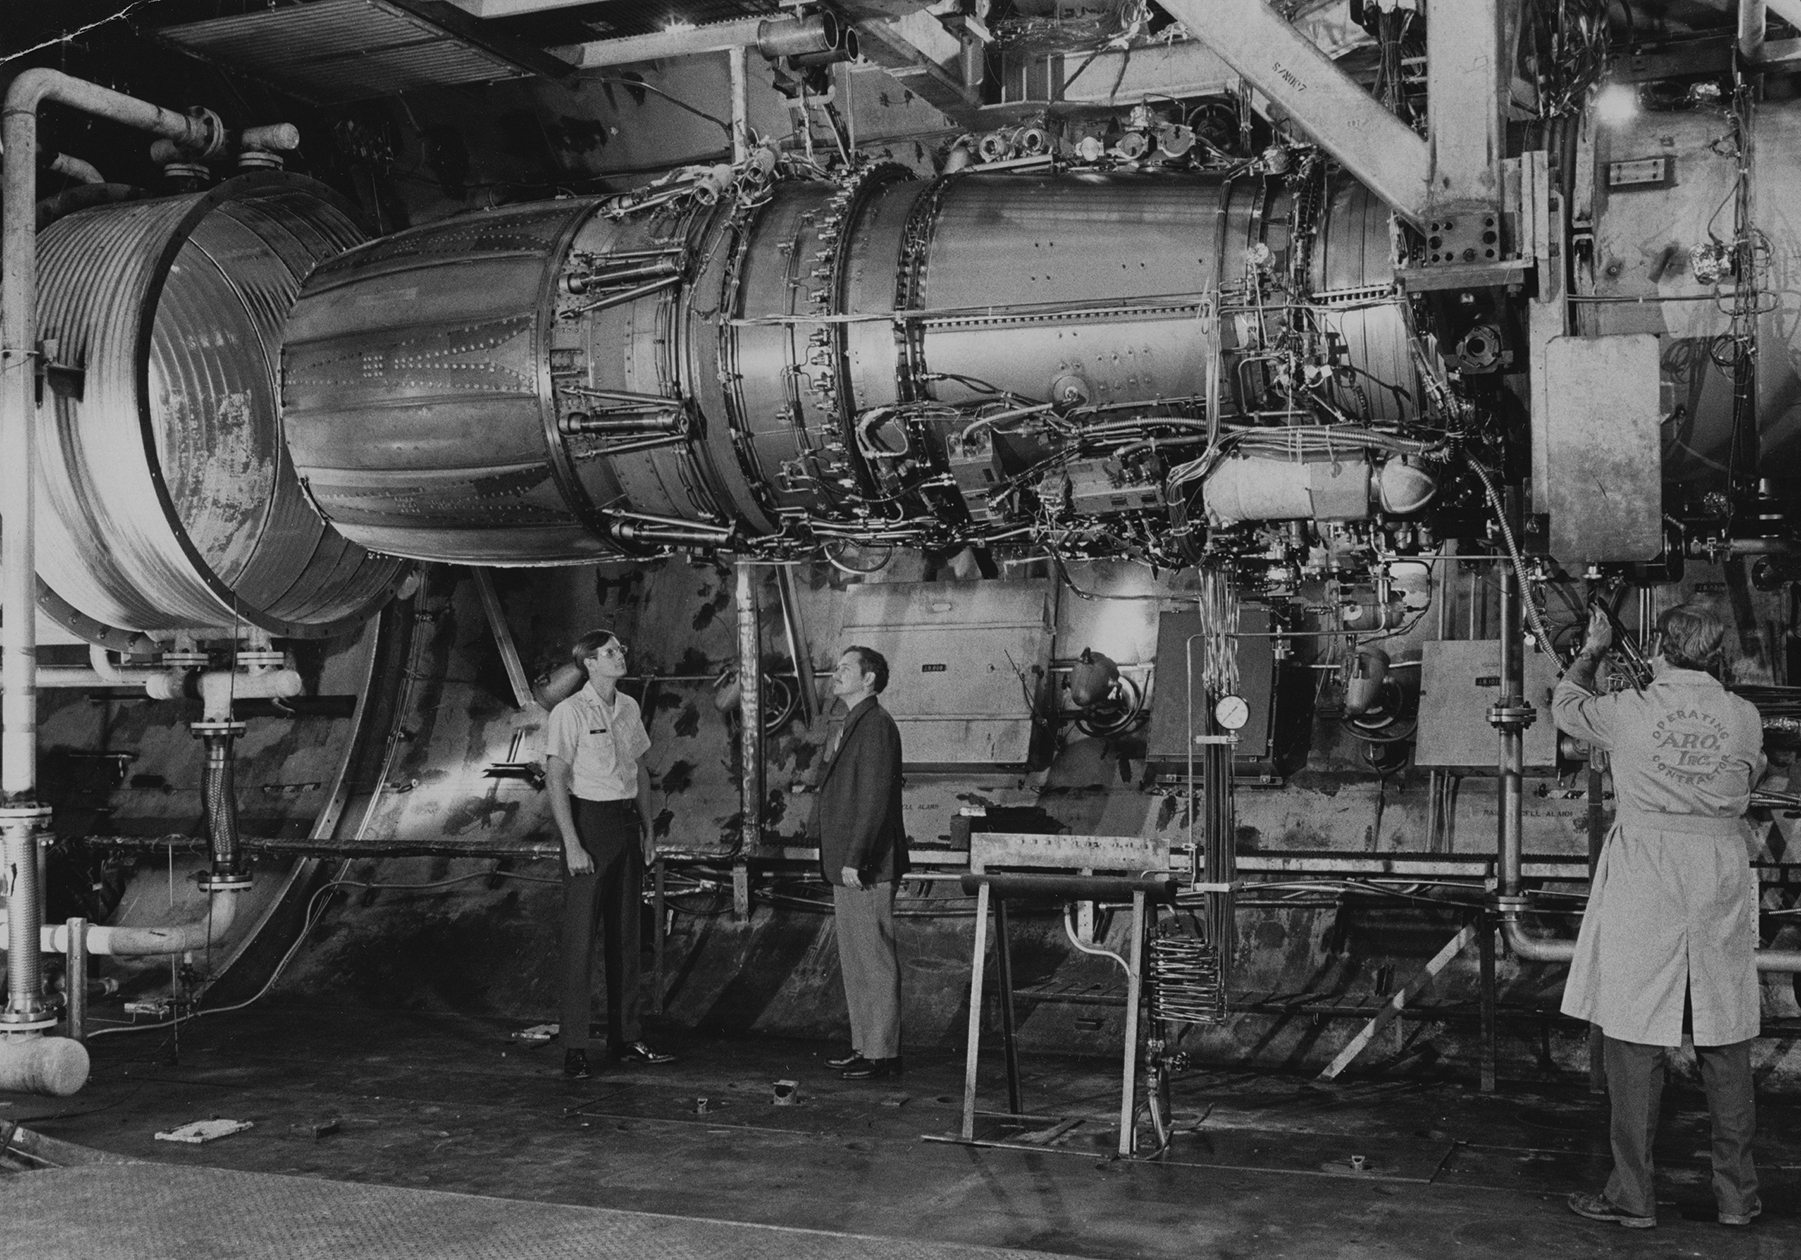 General Electric's F101 turbofan engine, powerplant for the Air Force's new B-1 strategic bomber, 1974.